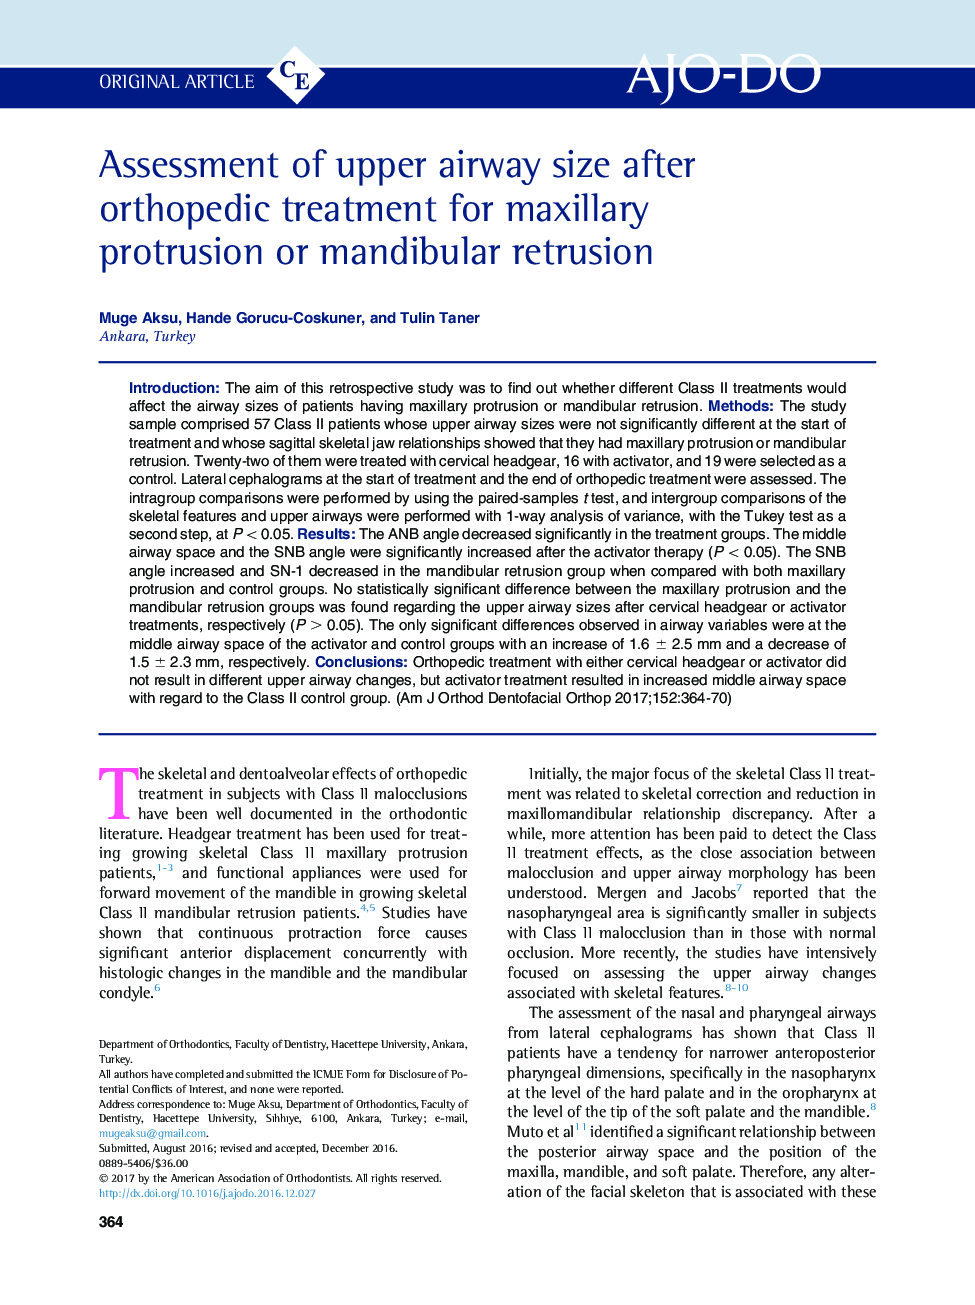 Assessment of upper airway size after orthopedic treatment for maxillary protrusion or mandibular retrusion